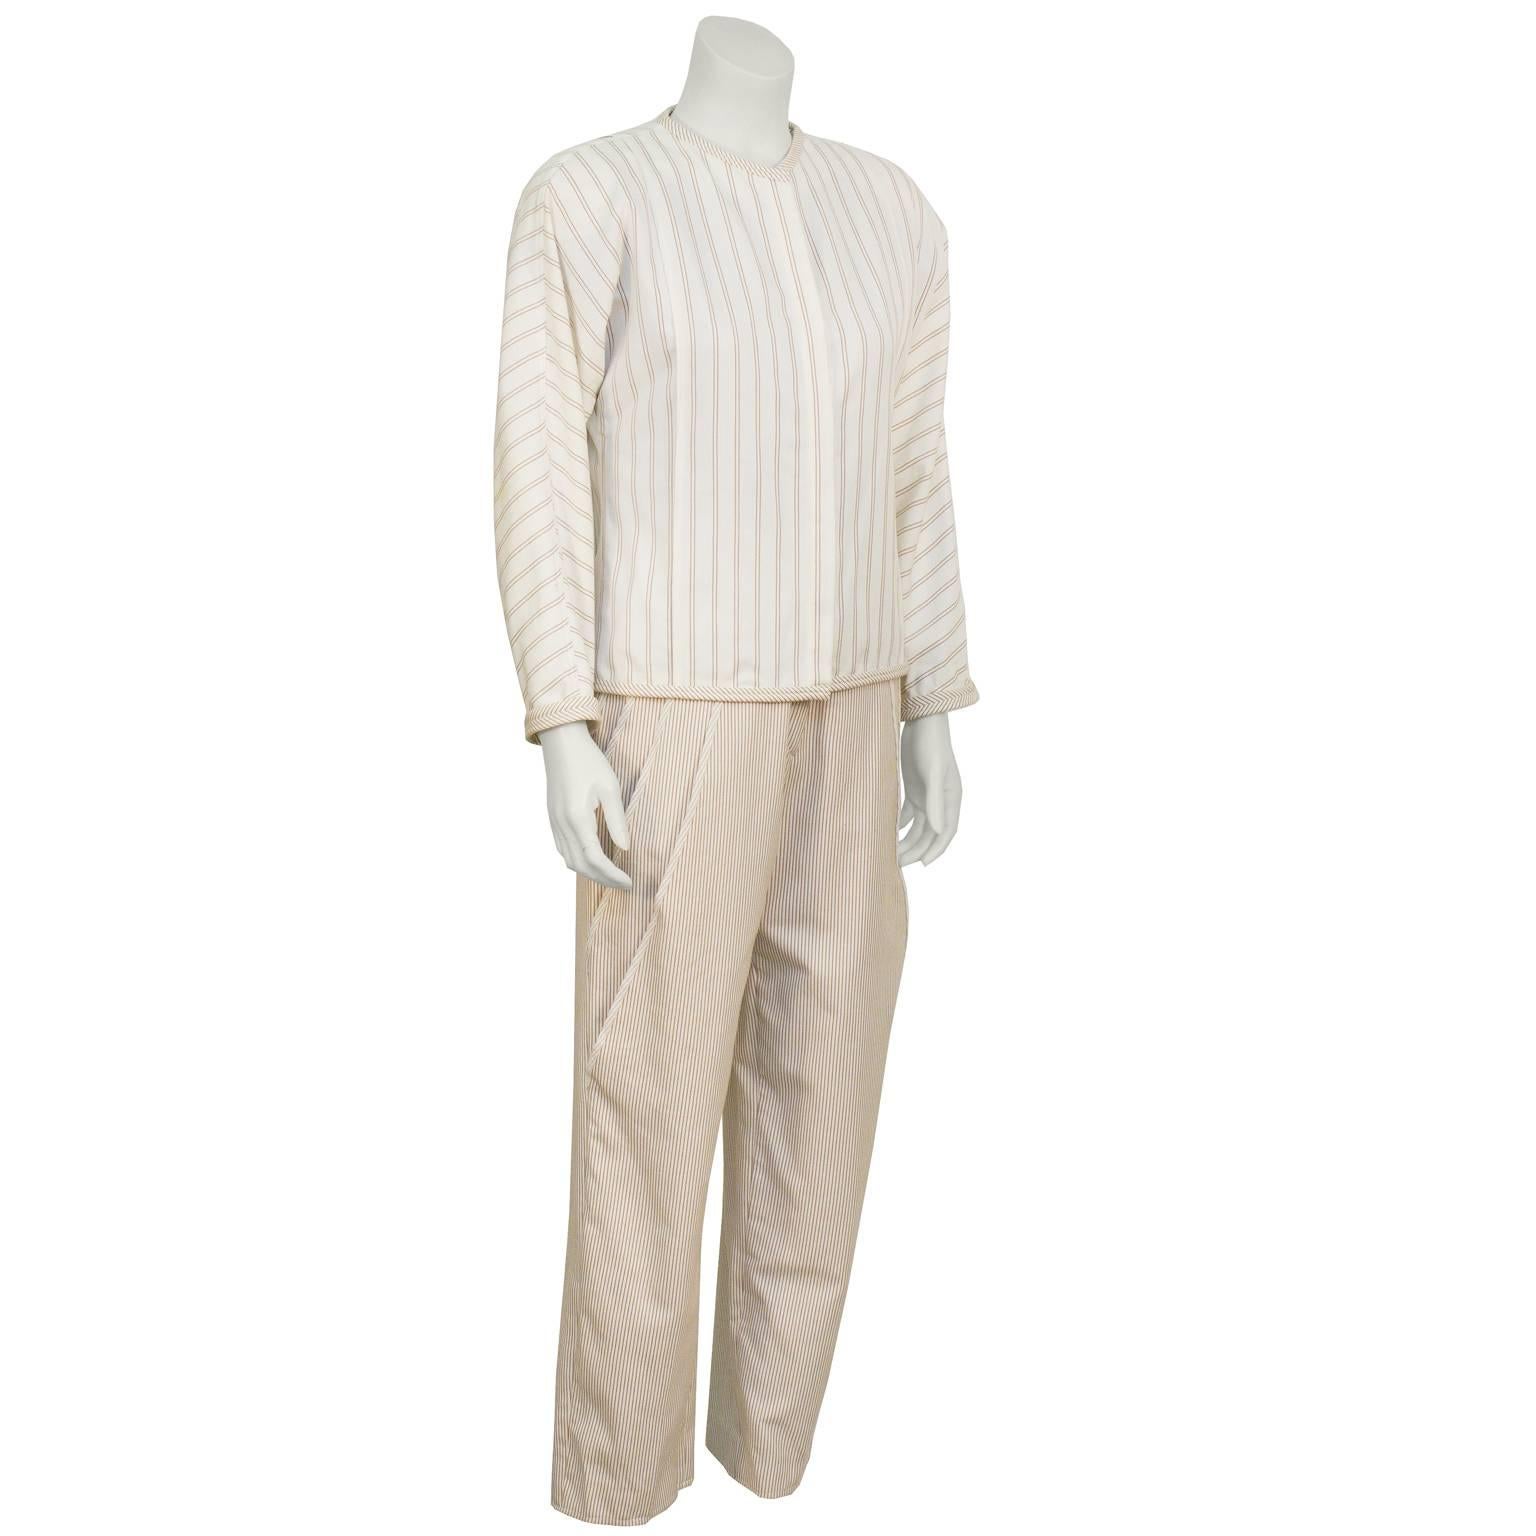 Gianni Versace cotton and linen suit from the late 1980's. The collarless cream jacket is covered in a taupe horizontal line patterned fabric and is banded at the collar, hem and cuffs in a similar fabric. Closes with buttons down the front. The